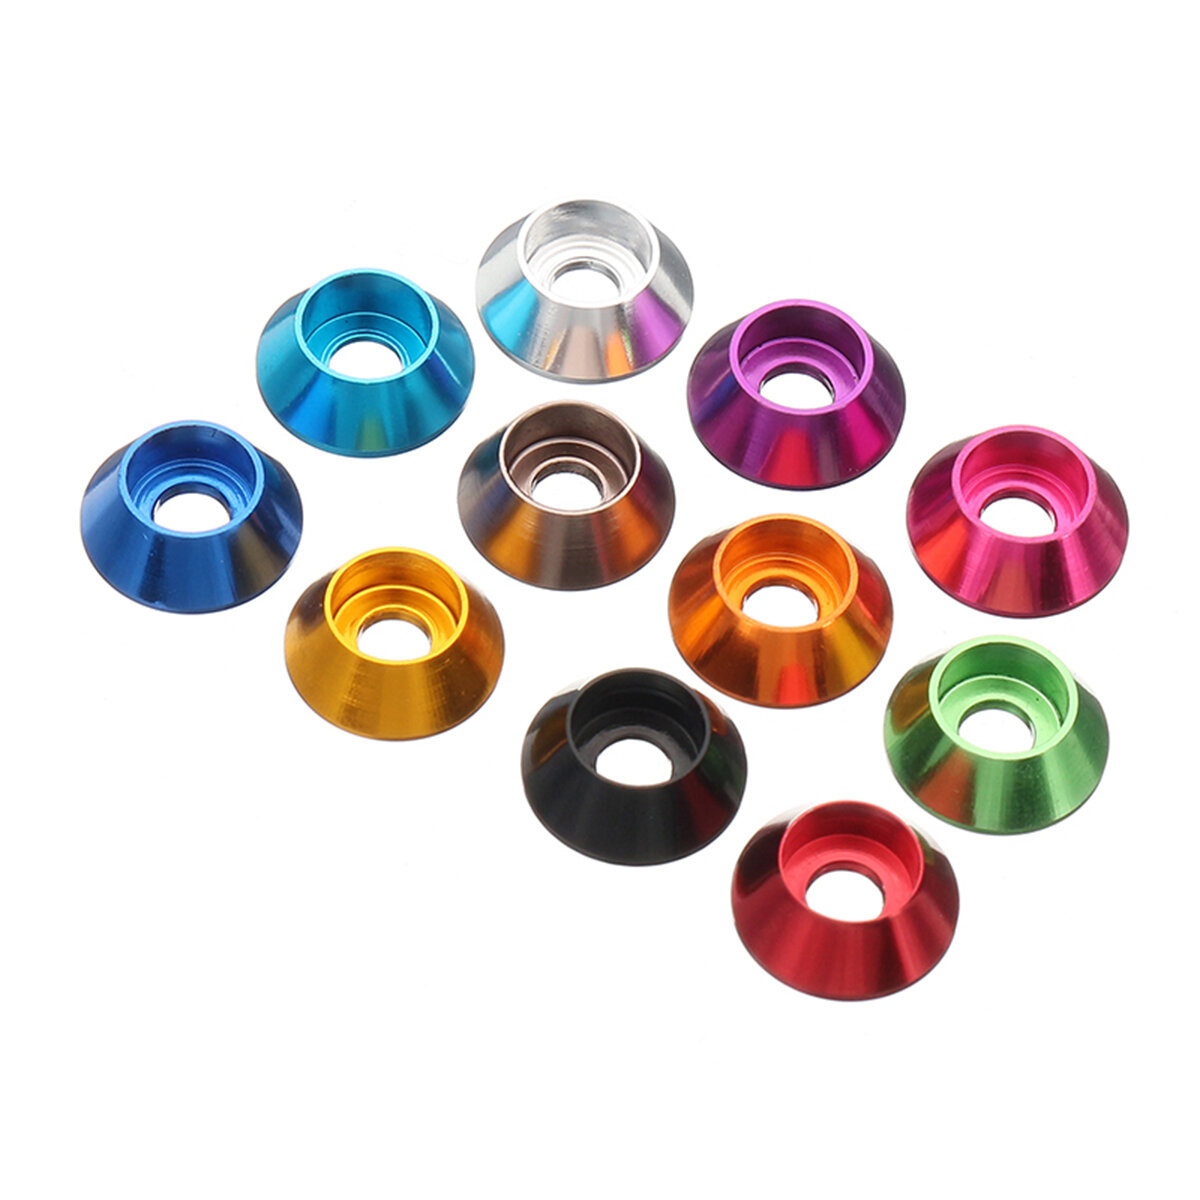 Suleve M5AN2 10Pcs M5 Cup Head Hex Screw Gasket Washer Nuts Aluminum Alloy Multicolor